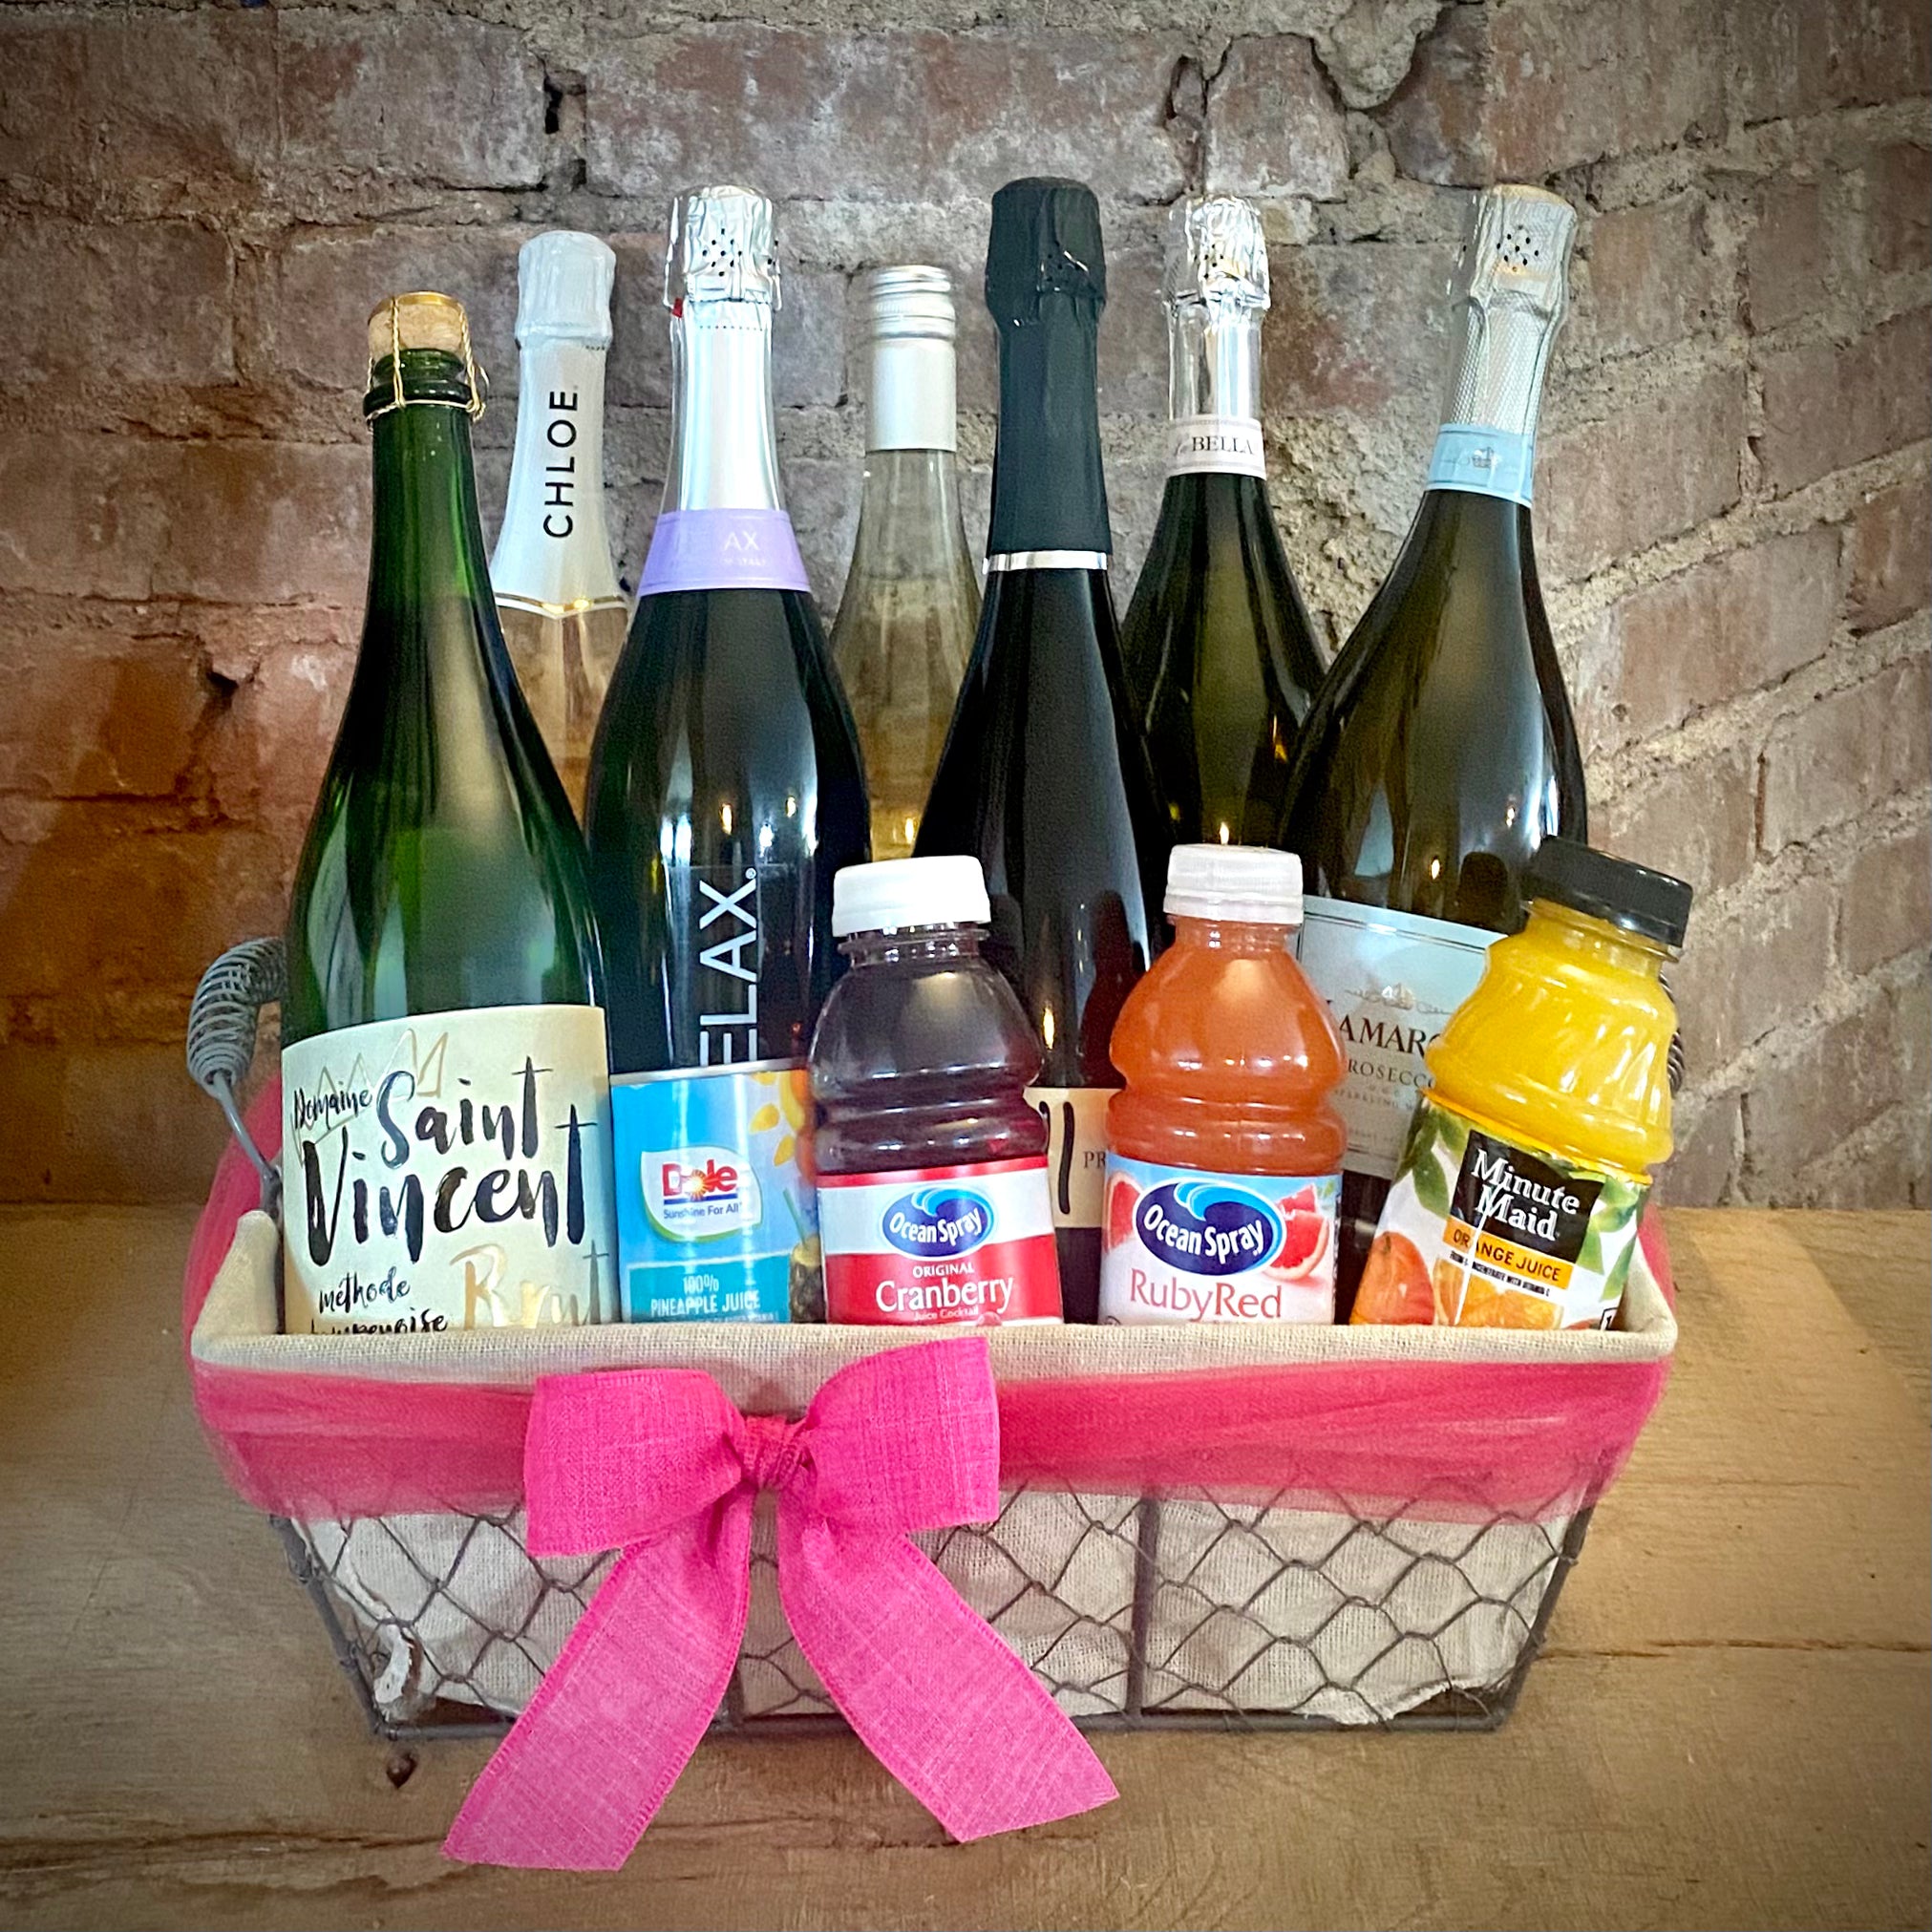 Champagne and Mimosa Gift Basket - La Marca by